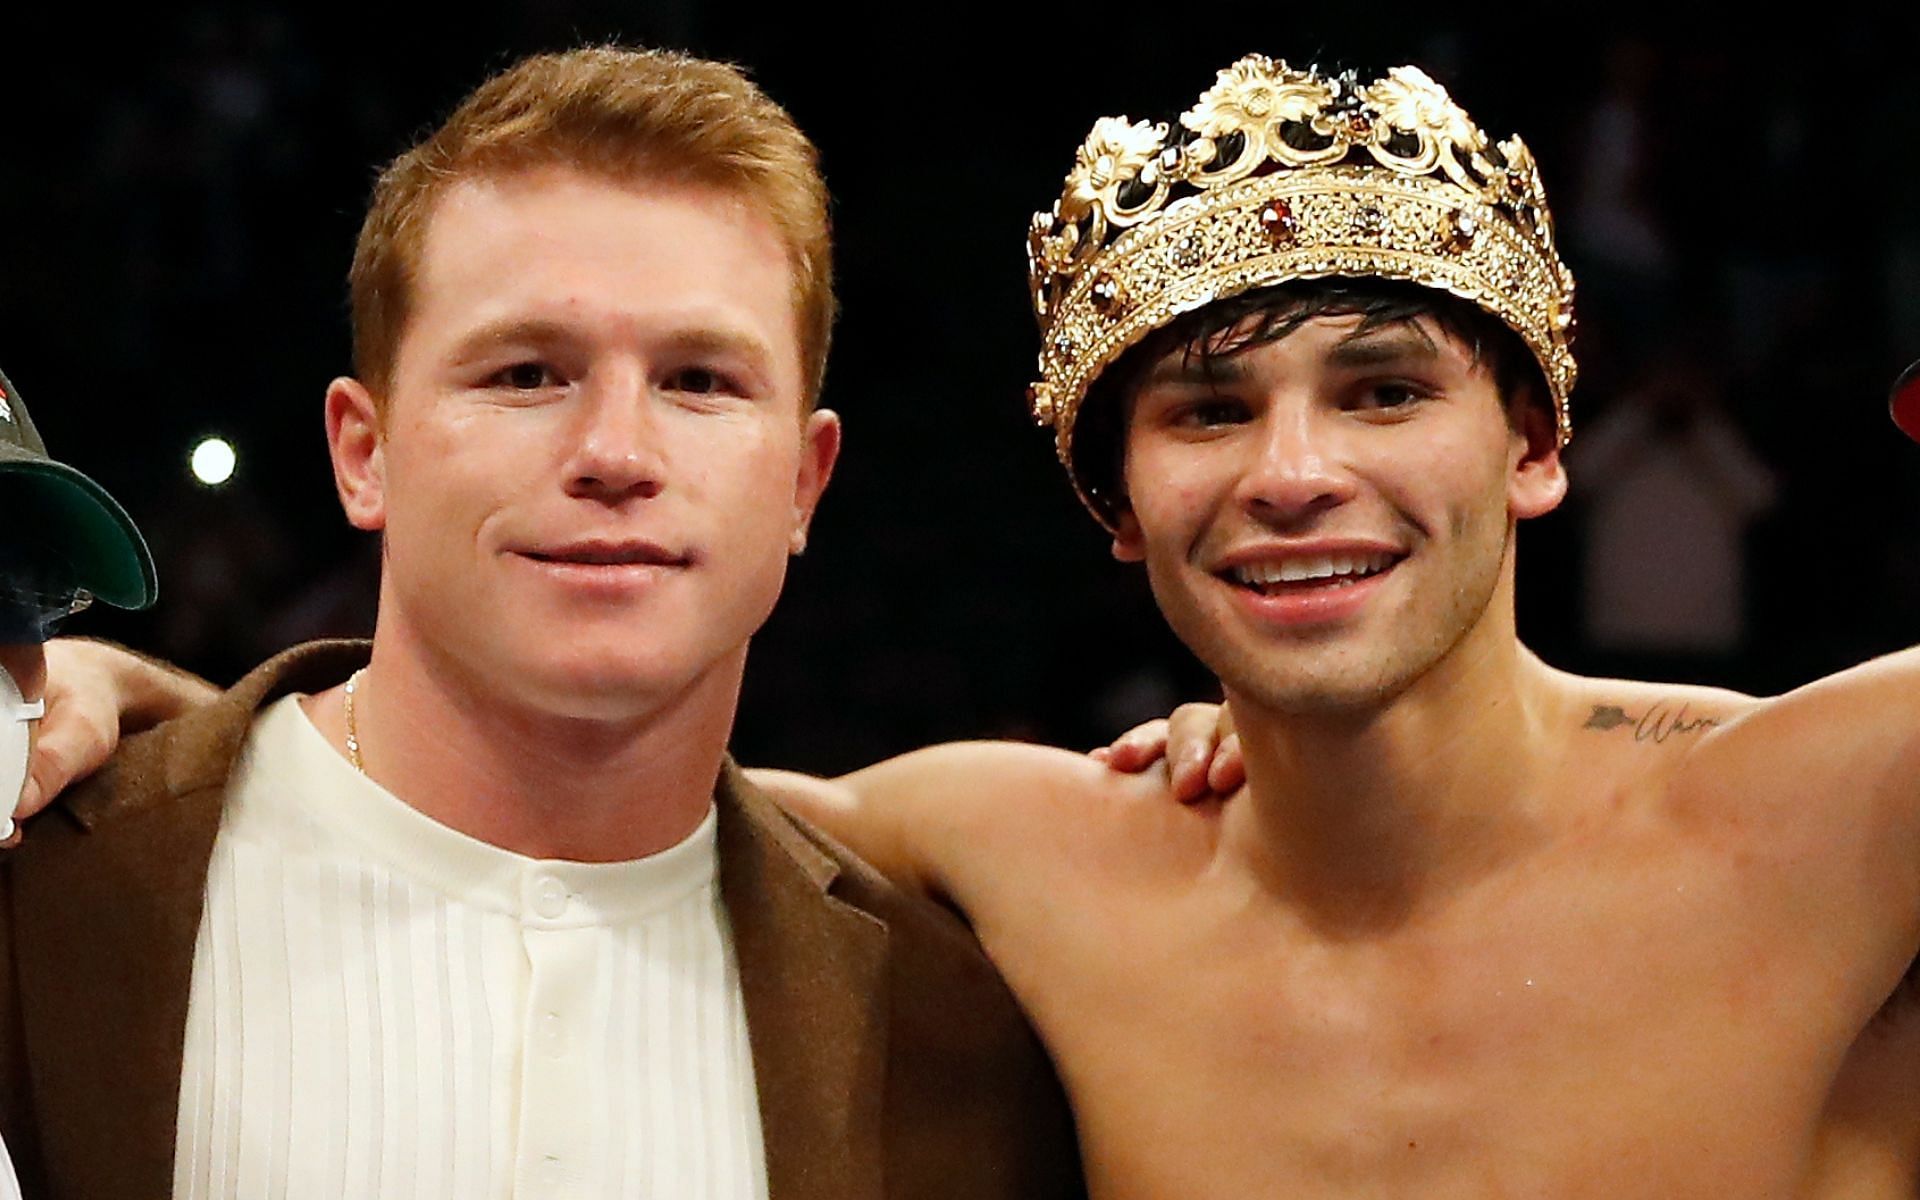 Canelo Alvarez (left) and Ryan Garcia (right) together after a boxing fight. [via Getty Images]